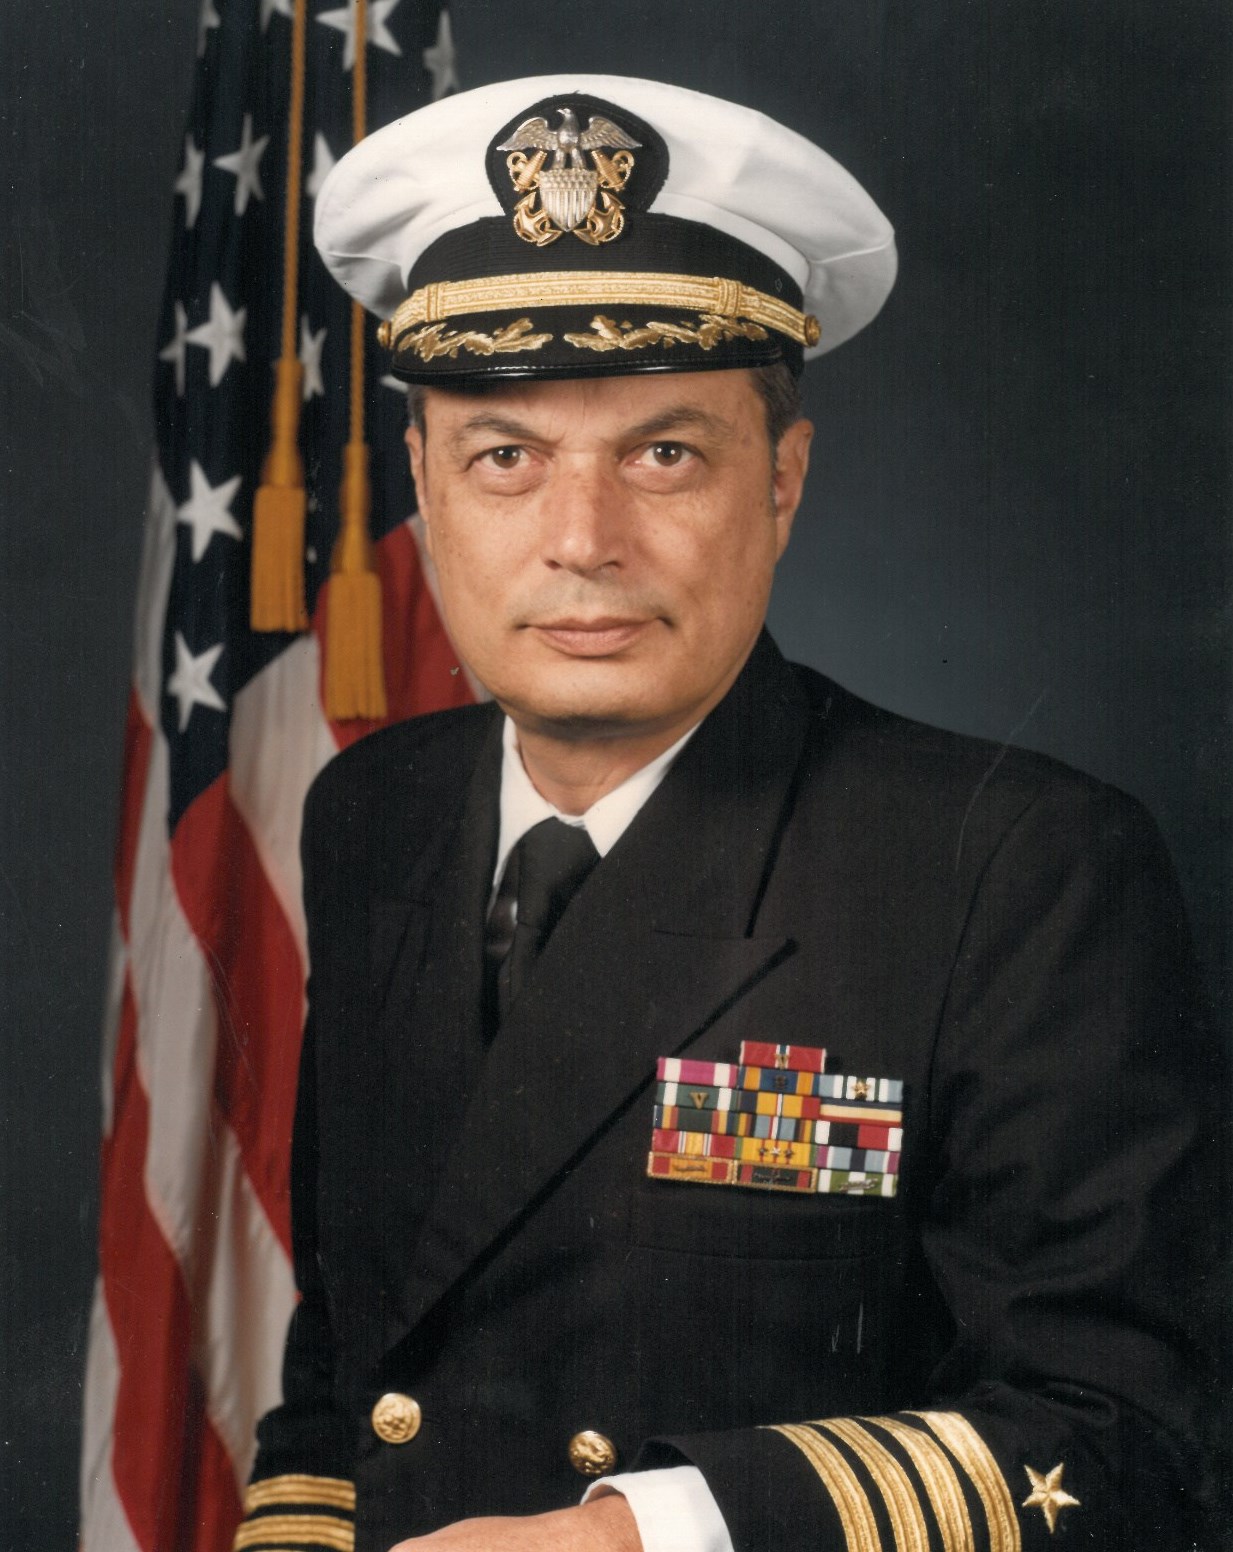 This is my dad, Captain Ronald E Mullen. He served in the U.S. Navy as his career. 